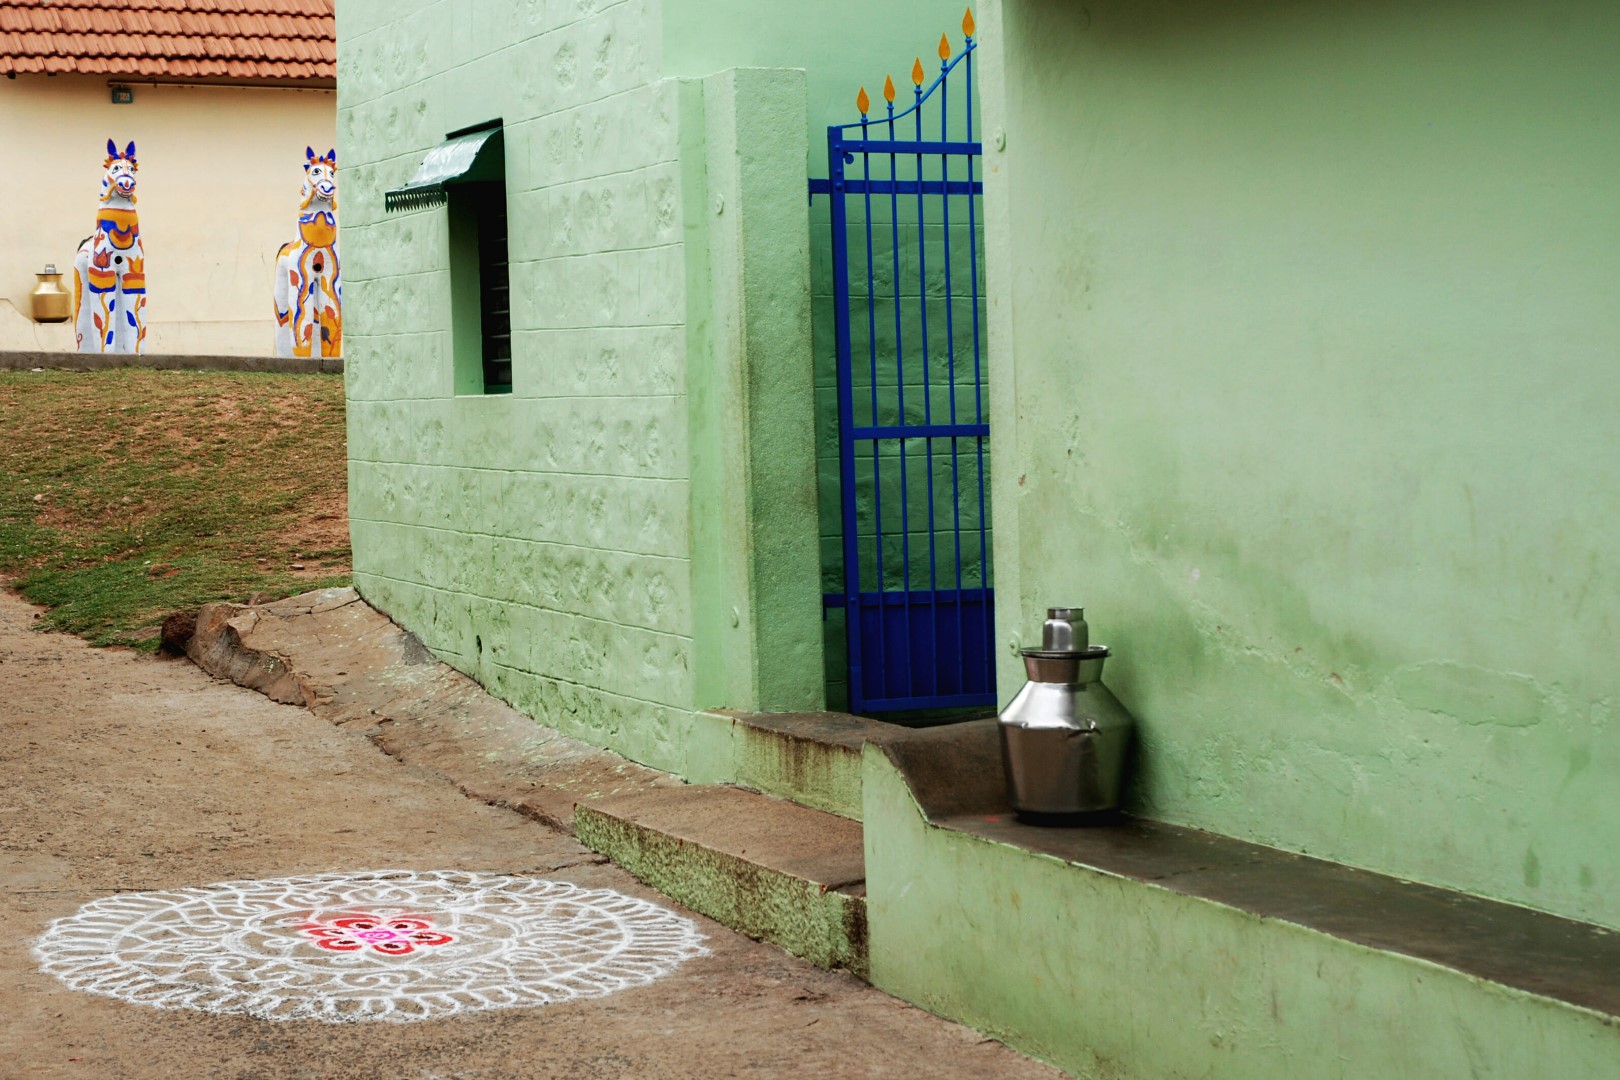 <span style="font-weight:normal;">Just an hour before the festival begins, this small potters' village is spick and span as it awaits a small crowd of devotees. A beautiful <i>kolam</i> has been traced on the street where the cortege will pass, and metal urns filled with drinking water are on hand to quench the thirst of Ayyanar's devotees.</span>